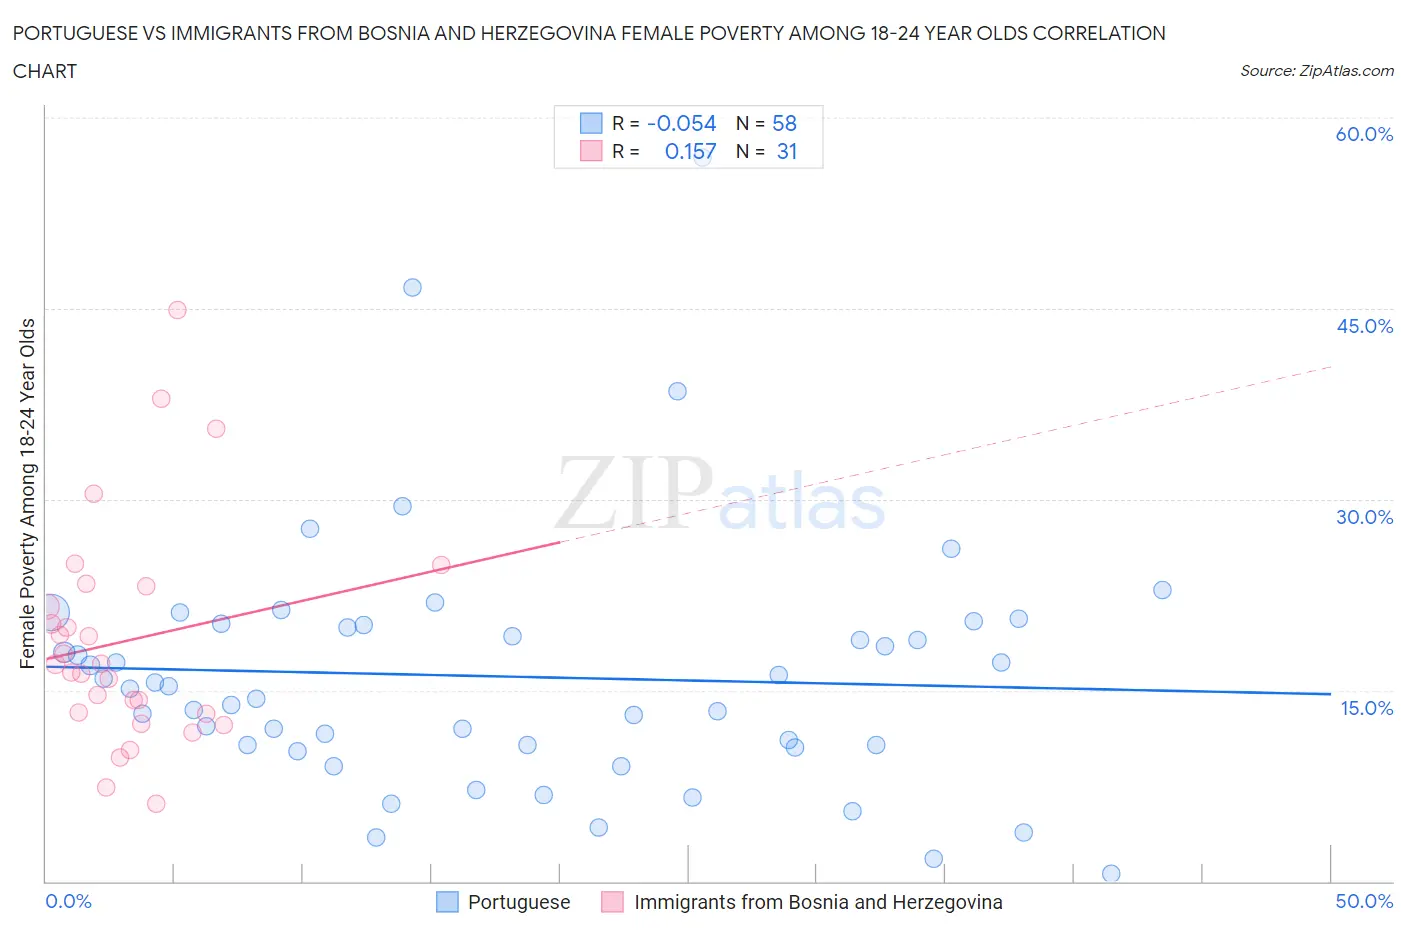 Portuguese vs Immigrants from Bosnia and Herzegovina Female Poverty Among 18-24 Year Olds